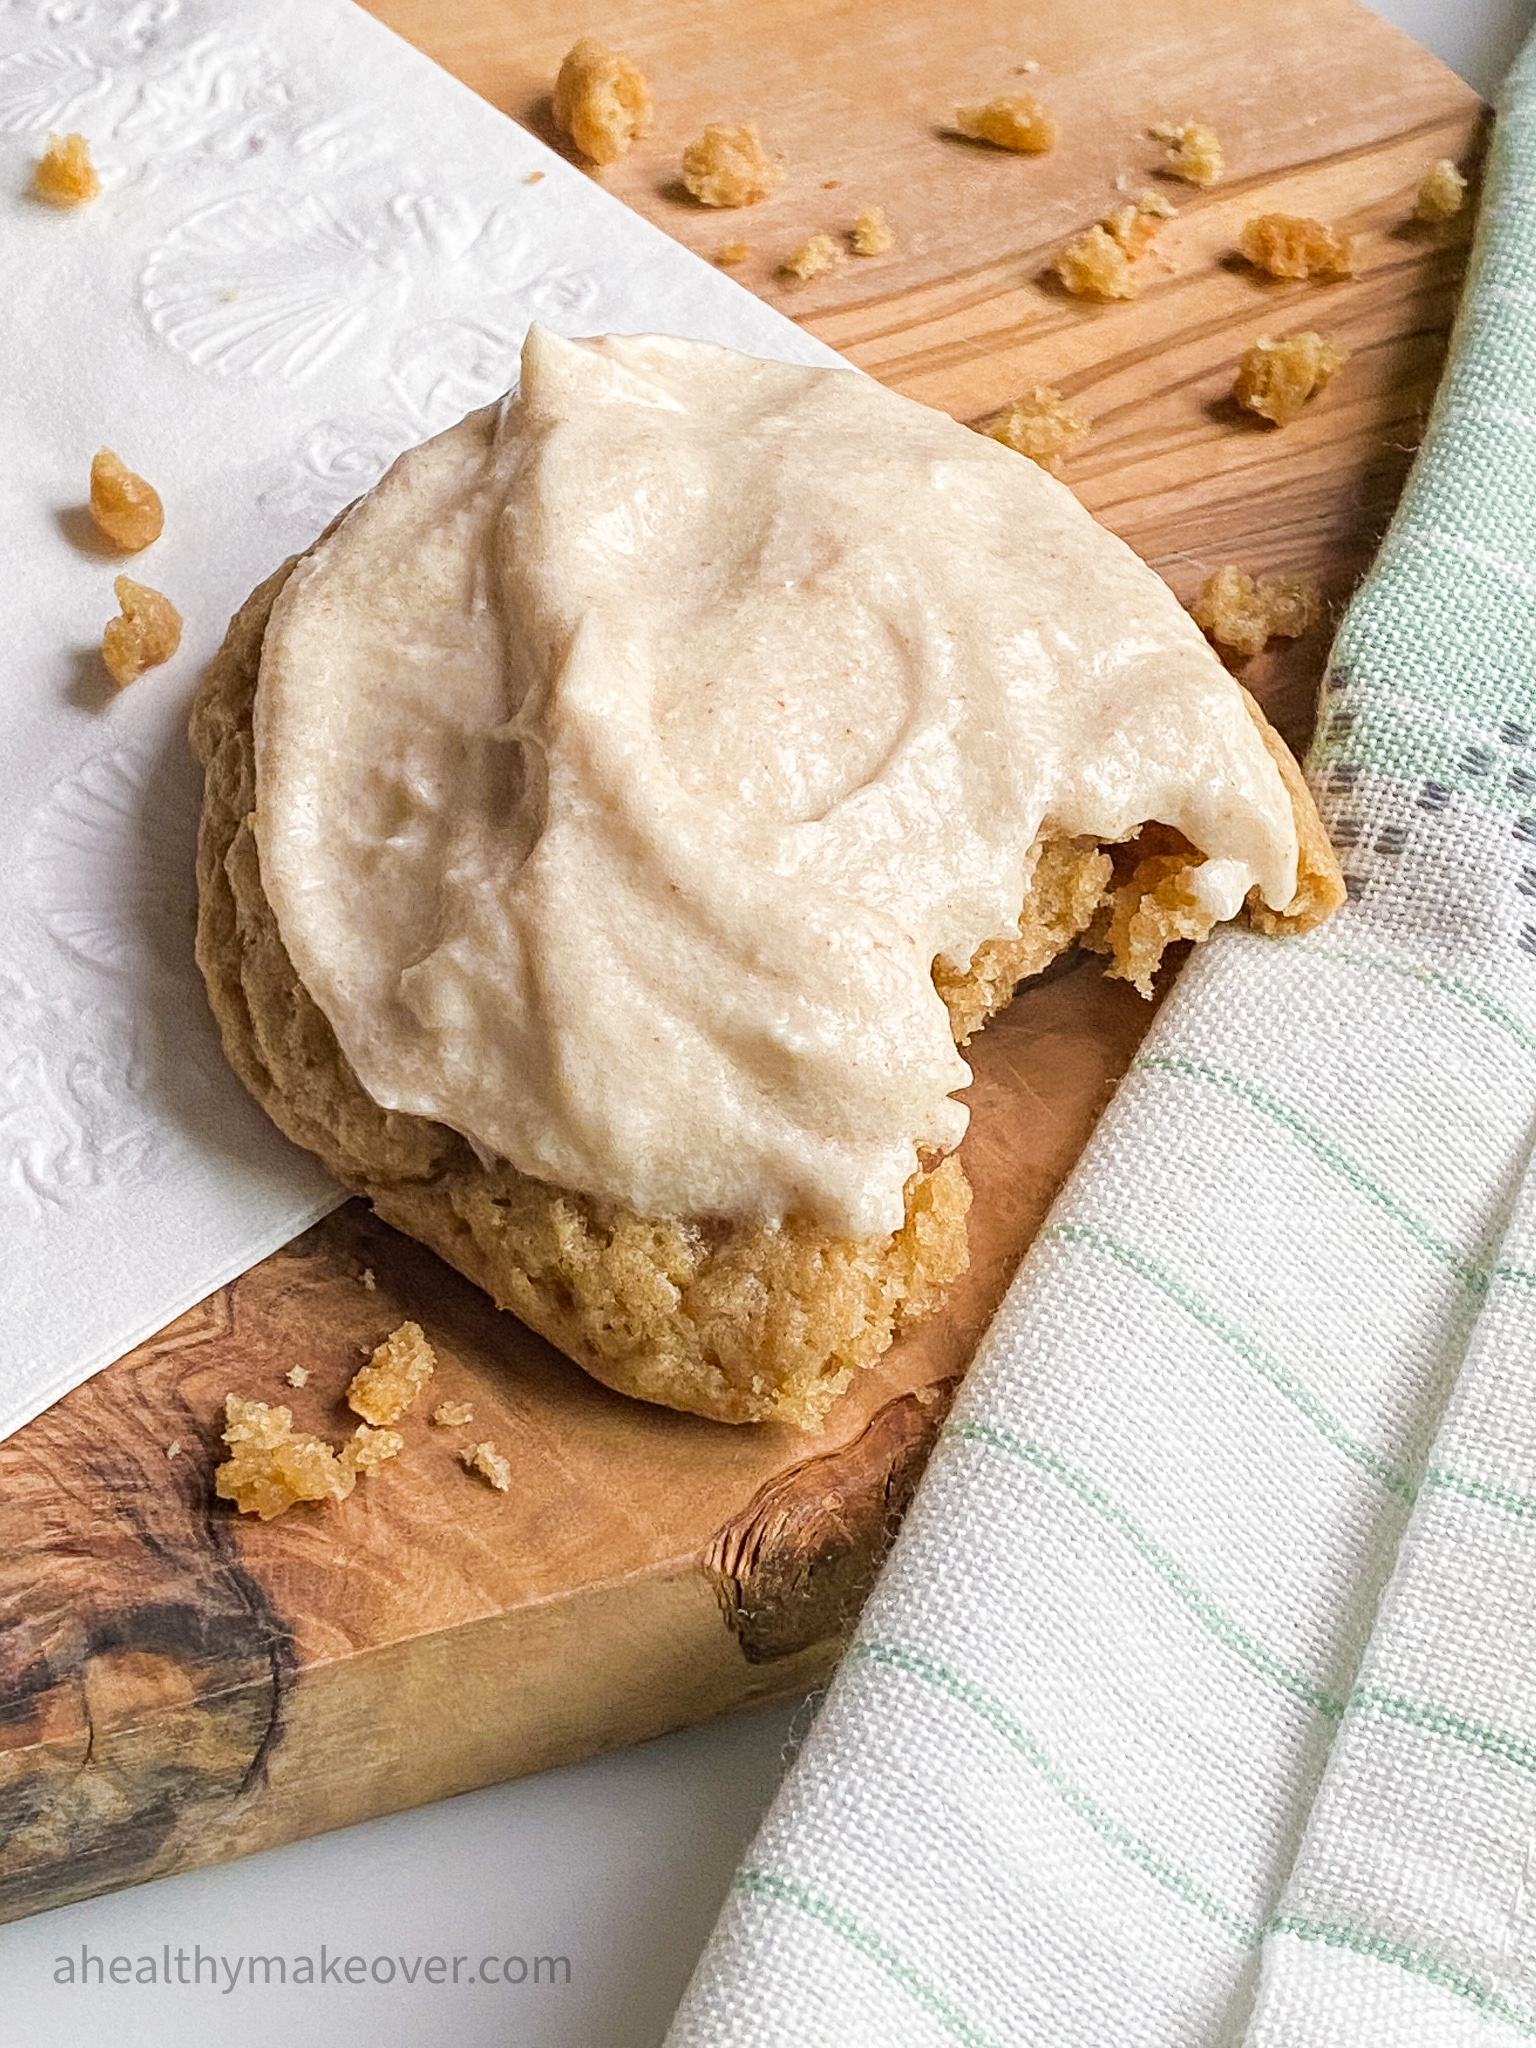 https://ahealthymakeover.com/wp-content/uploads/2020/09/Maple-Cookies-with-Brown-Butter-Frosting-4-2.jpg